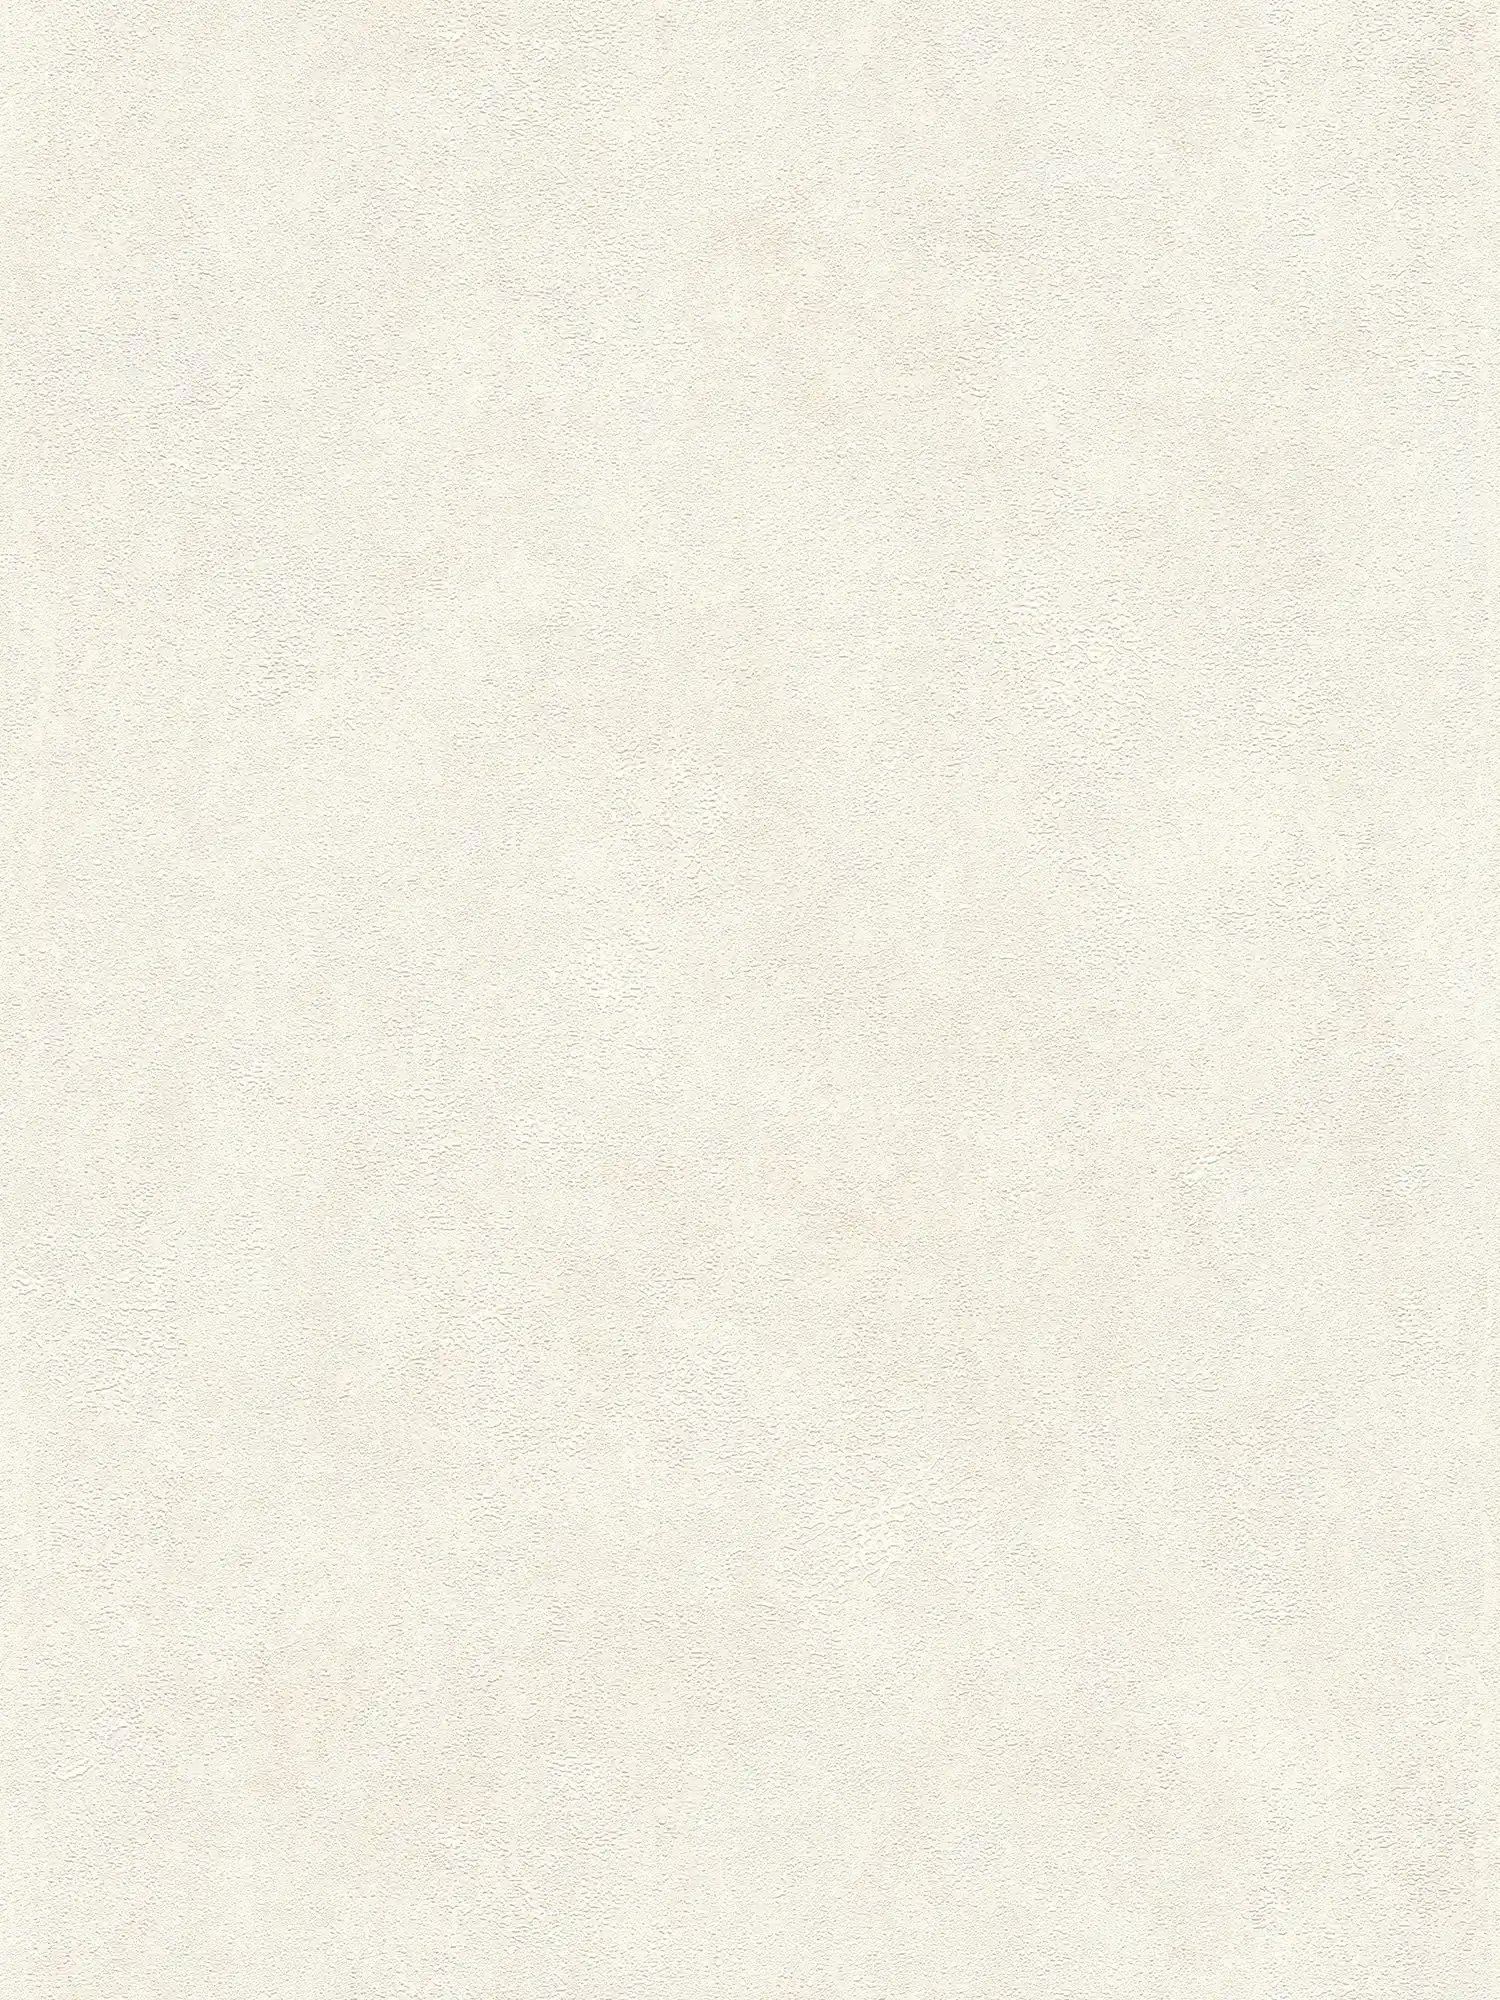 Non-woven wallpaper with light shimmer accents - cream, white
